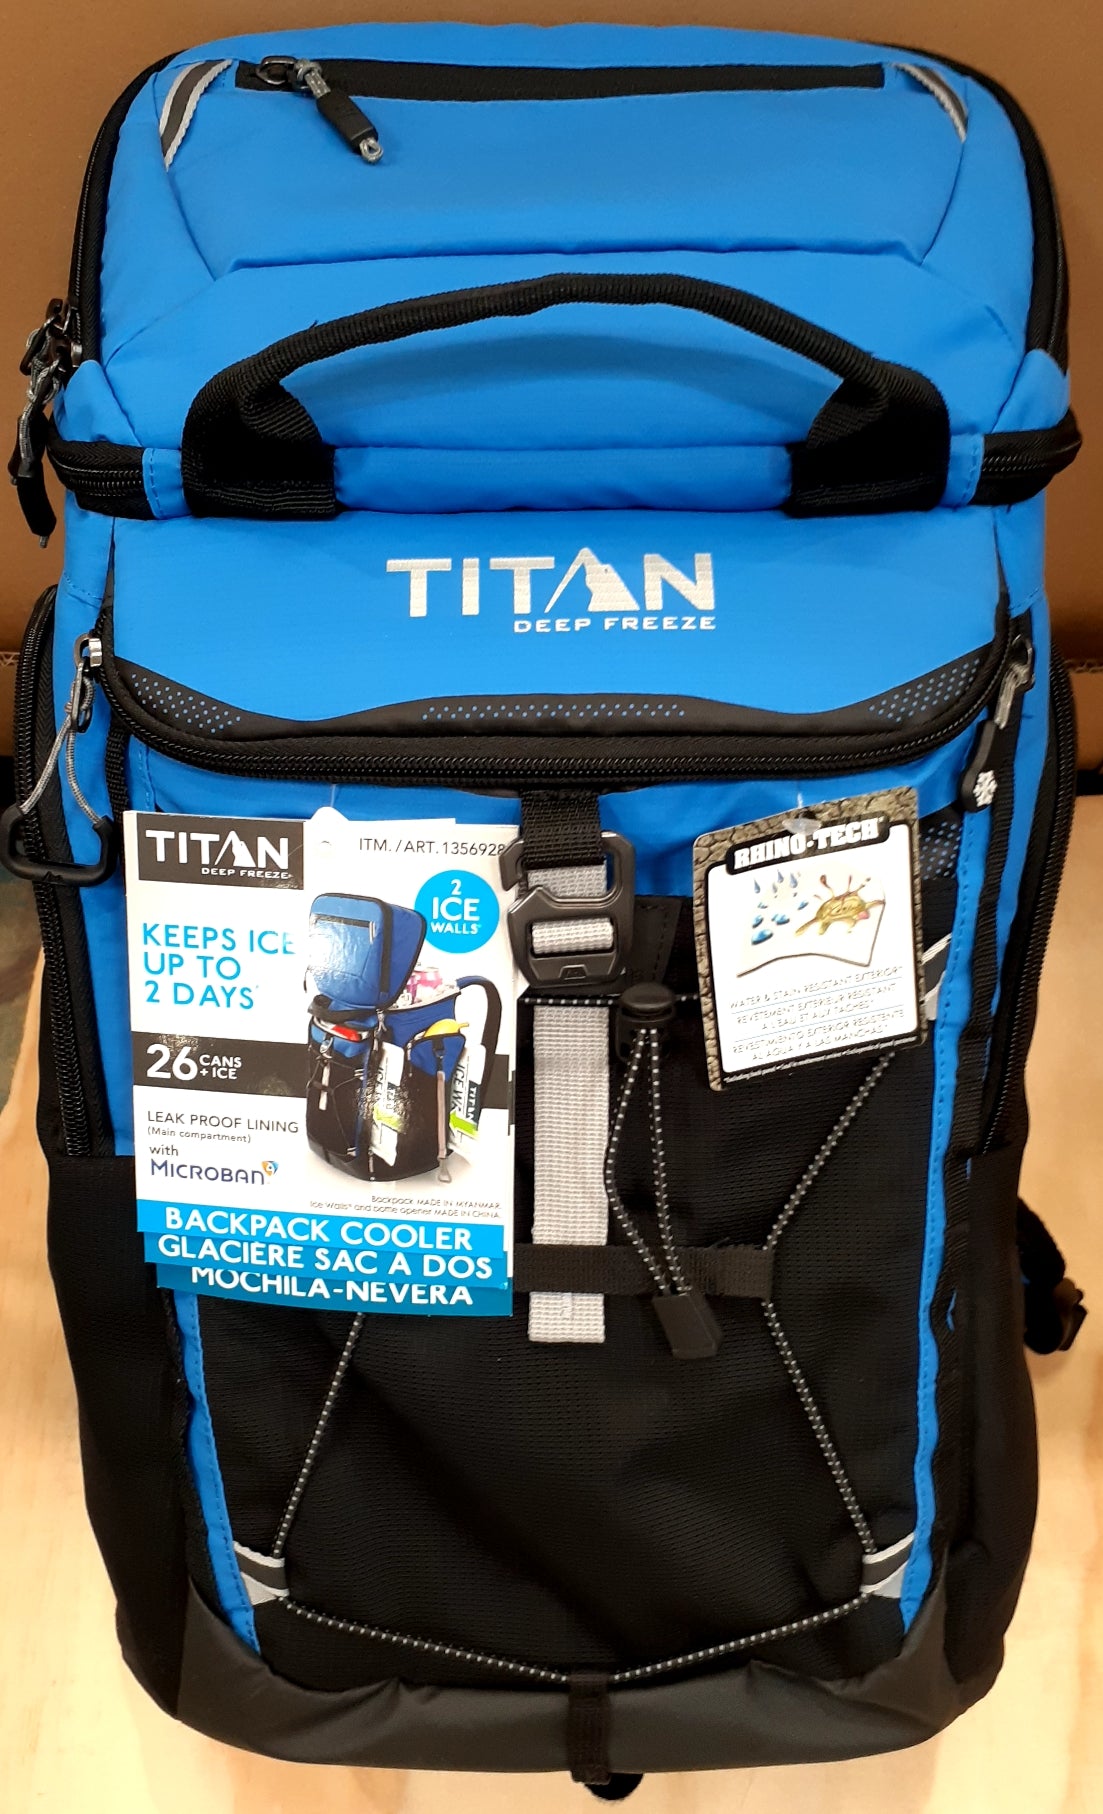 Titan cooler bag w/ ICE WALLS keeps 26 cans ice cold for 2 days FAST SHIPPING!